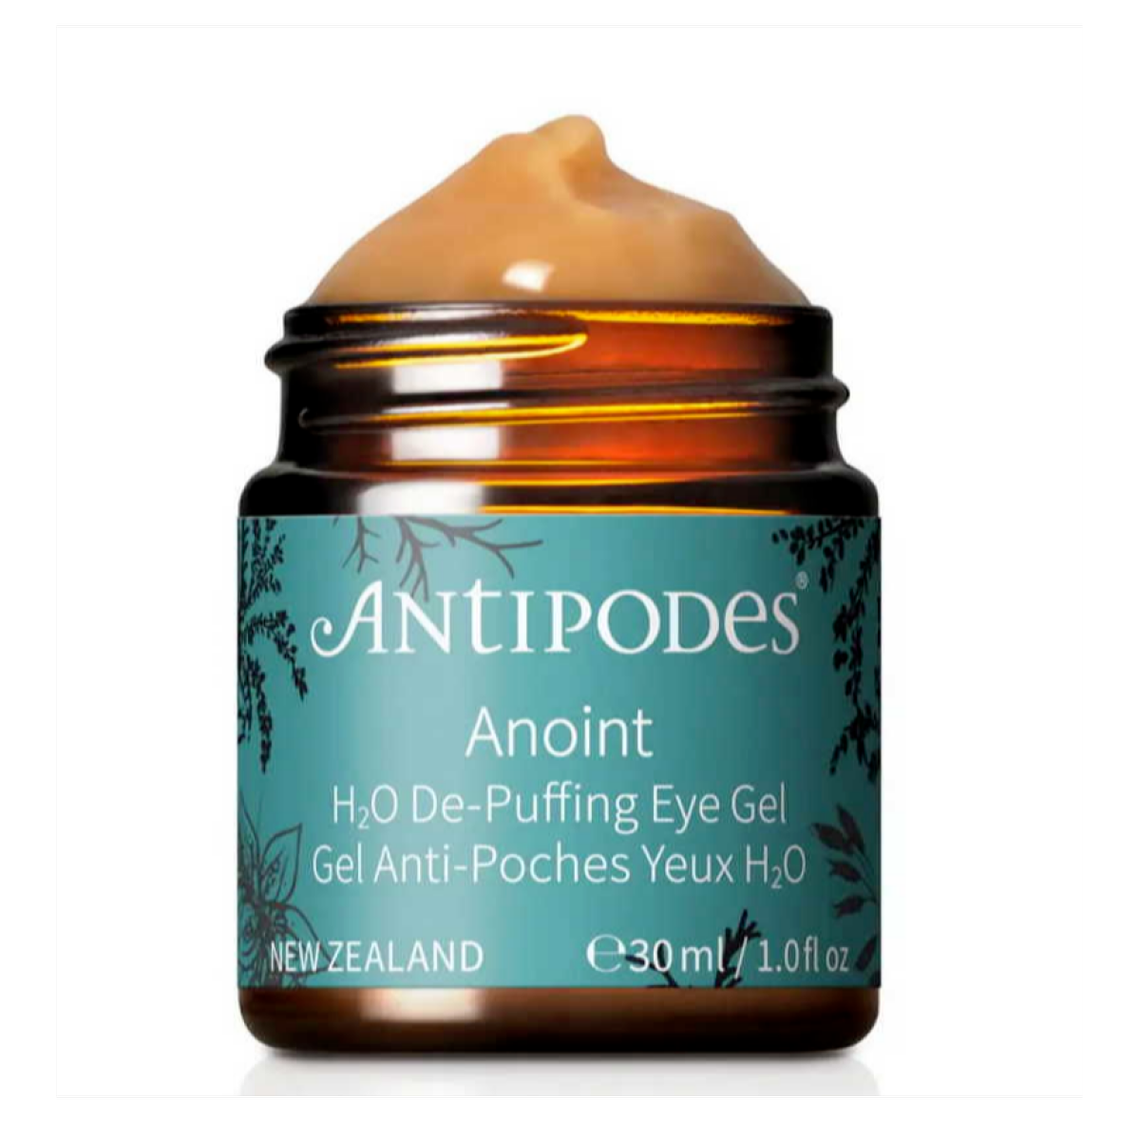 Gel Anti-Poches Yeux H2O Anoint